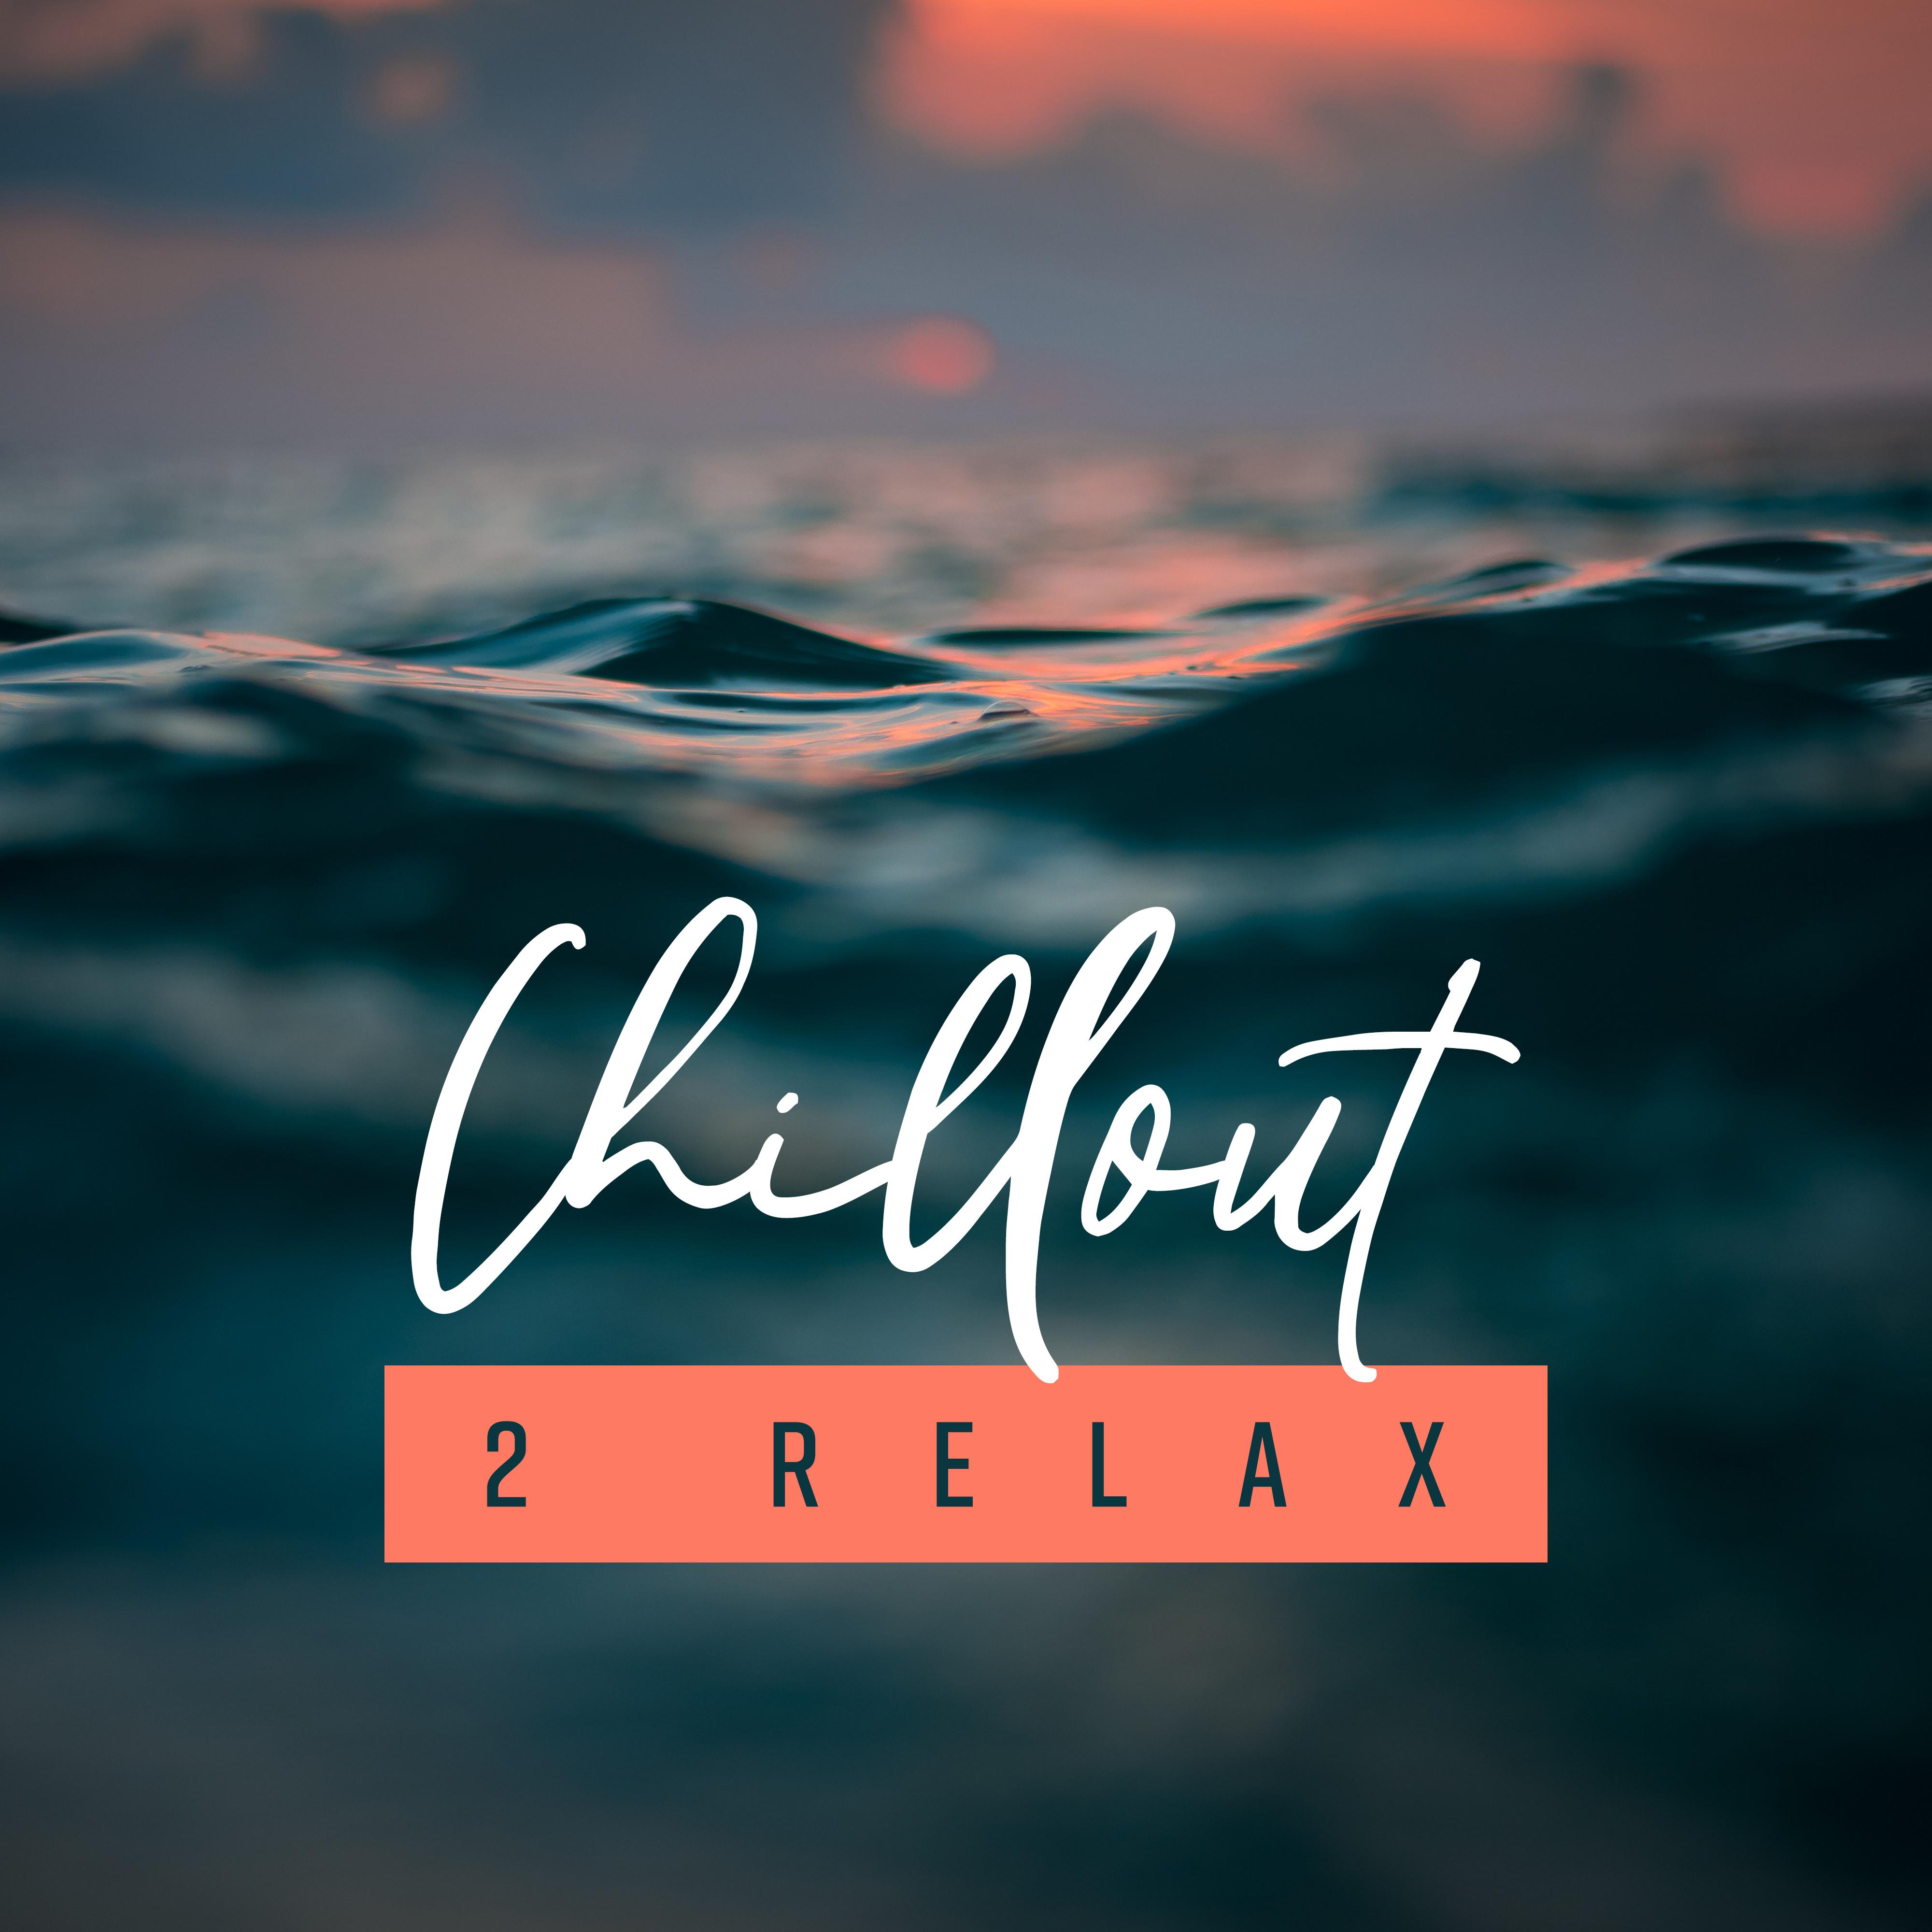 Chillout 2 Relax: 15 Smooth Chill Vibes for Beach Party & Relaxation, Summer Hot Beats, Dance Music